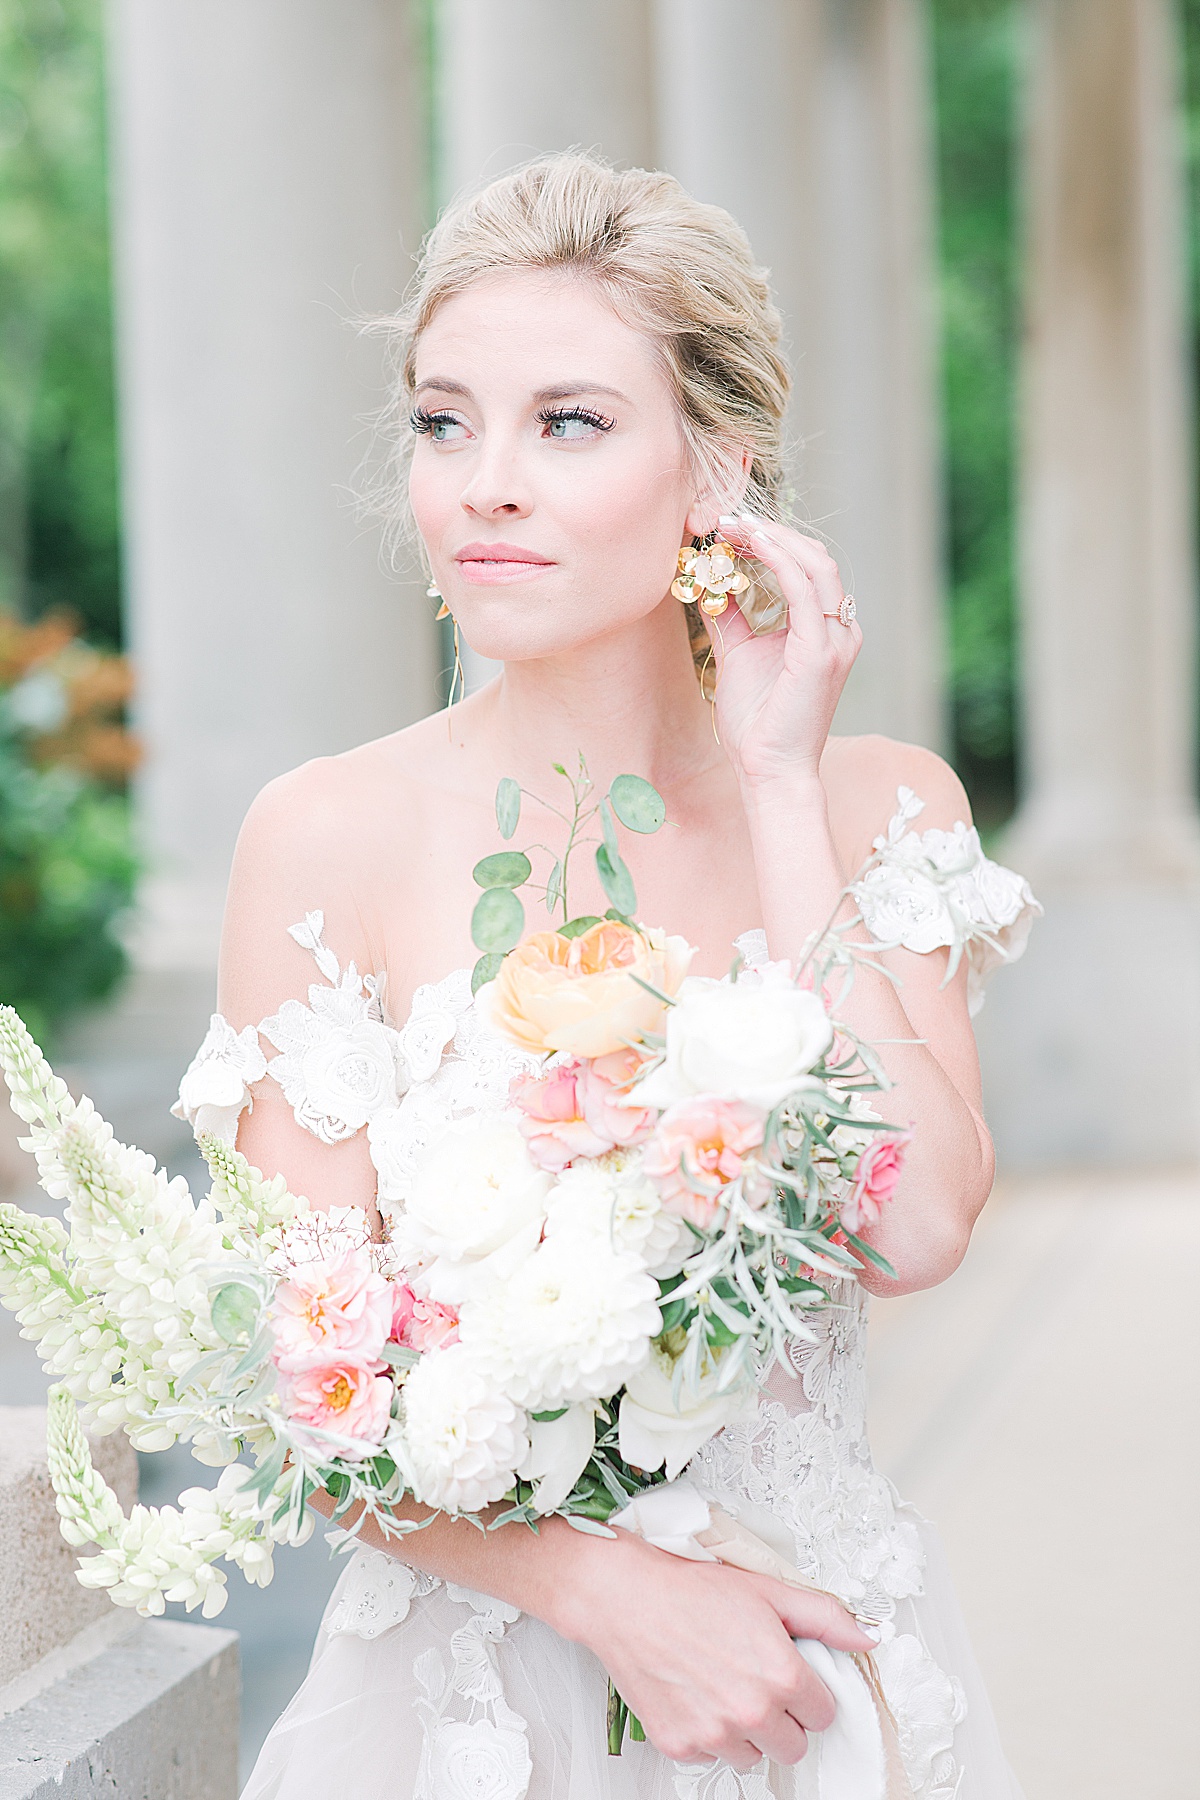 Château Bouffémont Wedding Bride Holding Bouquet and Earring Looking Off Photo